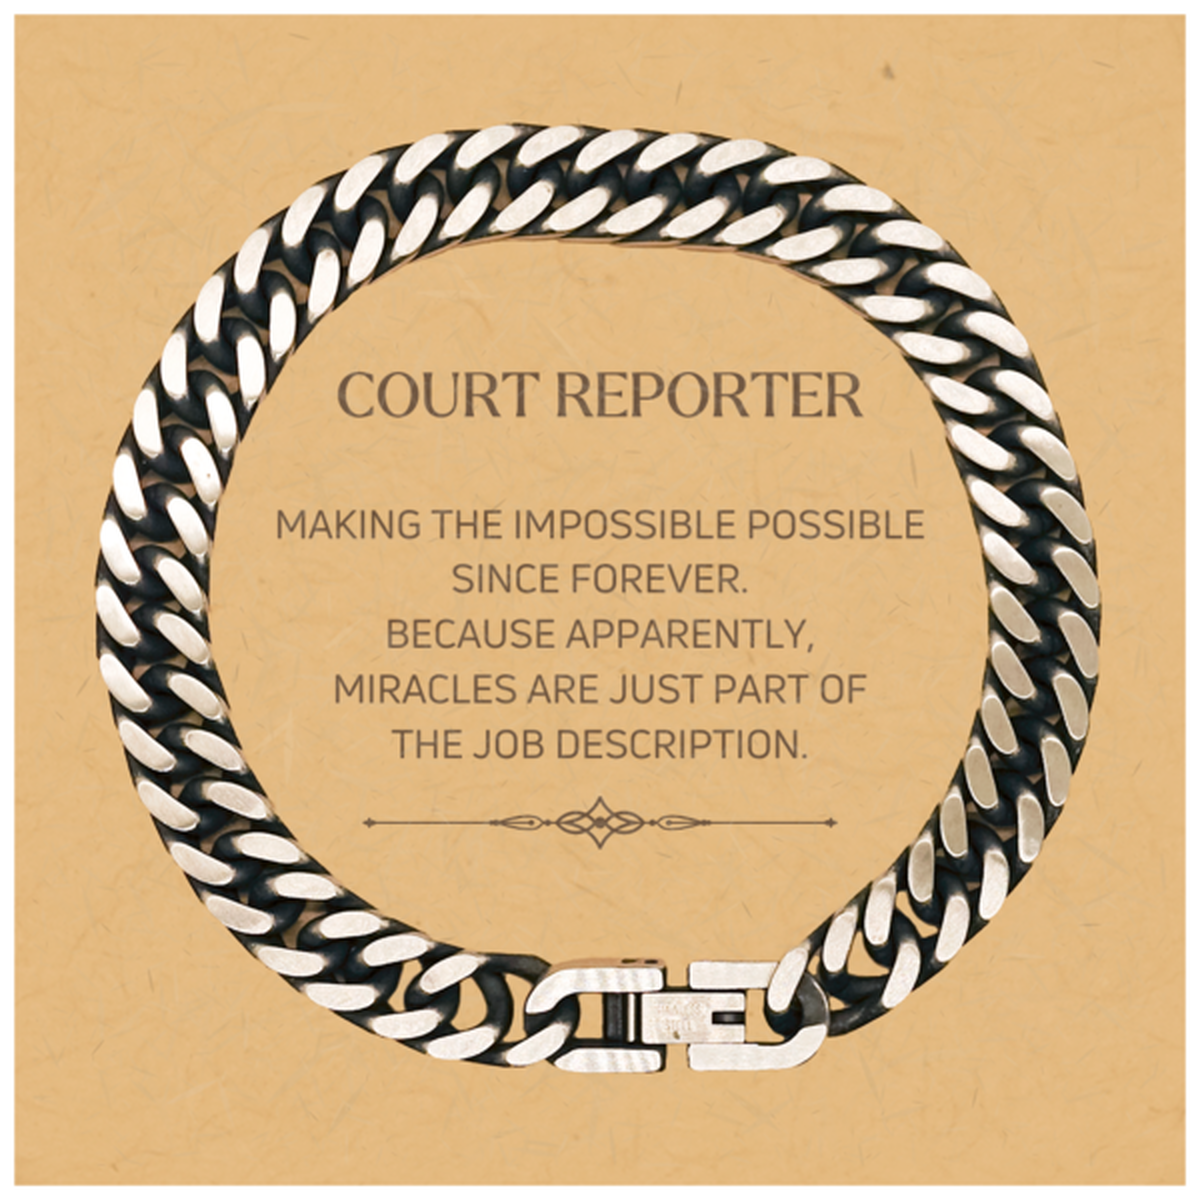 Funny Court Reporter Gifts, Miracles are just part of the job description, Inspirational Birthday Christmas Cuban Link Chain Bracelet For Court Reporter, Men, Women, Coworkers, Friends, Boss